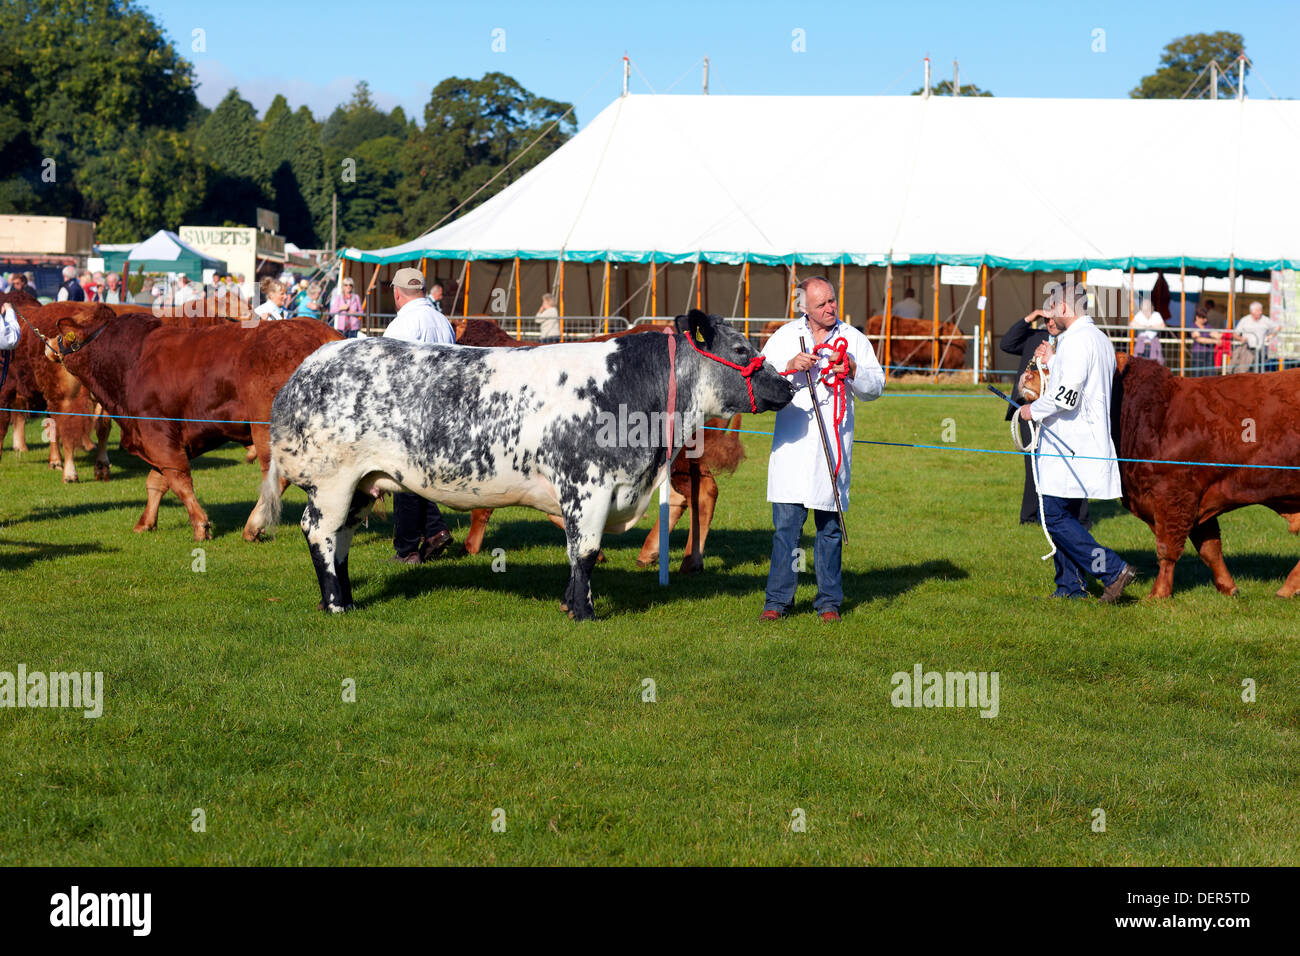 Nidderdale Show, Pateley Bridge, North Yorkshire, UK. 23rd Sep, 2013. Competitors in the cattle classes enjoy the warm autumn sunshine at the showground as the good weather brings in the crowds to the Nidderdale Show. The Annual Nidderdale Show, held in the picturesque surrounds of Bewerley Park, Pateley Bridge, is one of the county’s foremost agricultural shows. It regularly attracts crowds of 20,000 and traditionally marks the end of the agricultural show season. Credit:  Christina Bollen/Alamy Live News Stock Photo